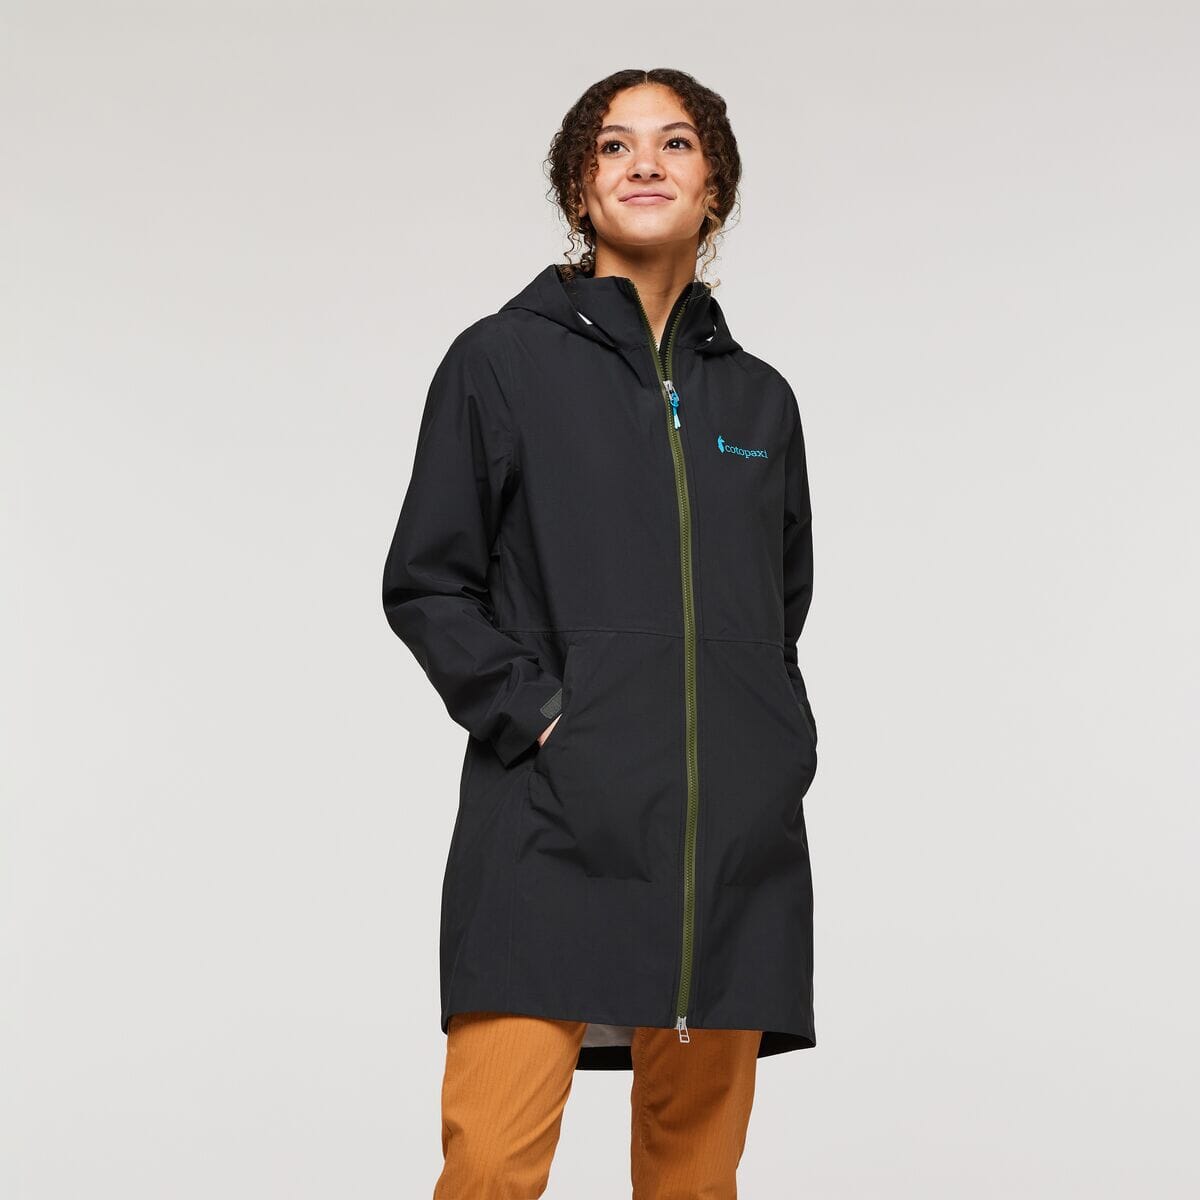 Cotopaxi - W's Cielo Rain Trench - 100% recycled polyester - Weekendbee - sustainable sportswear